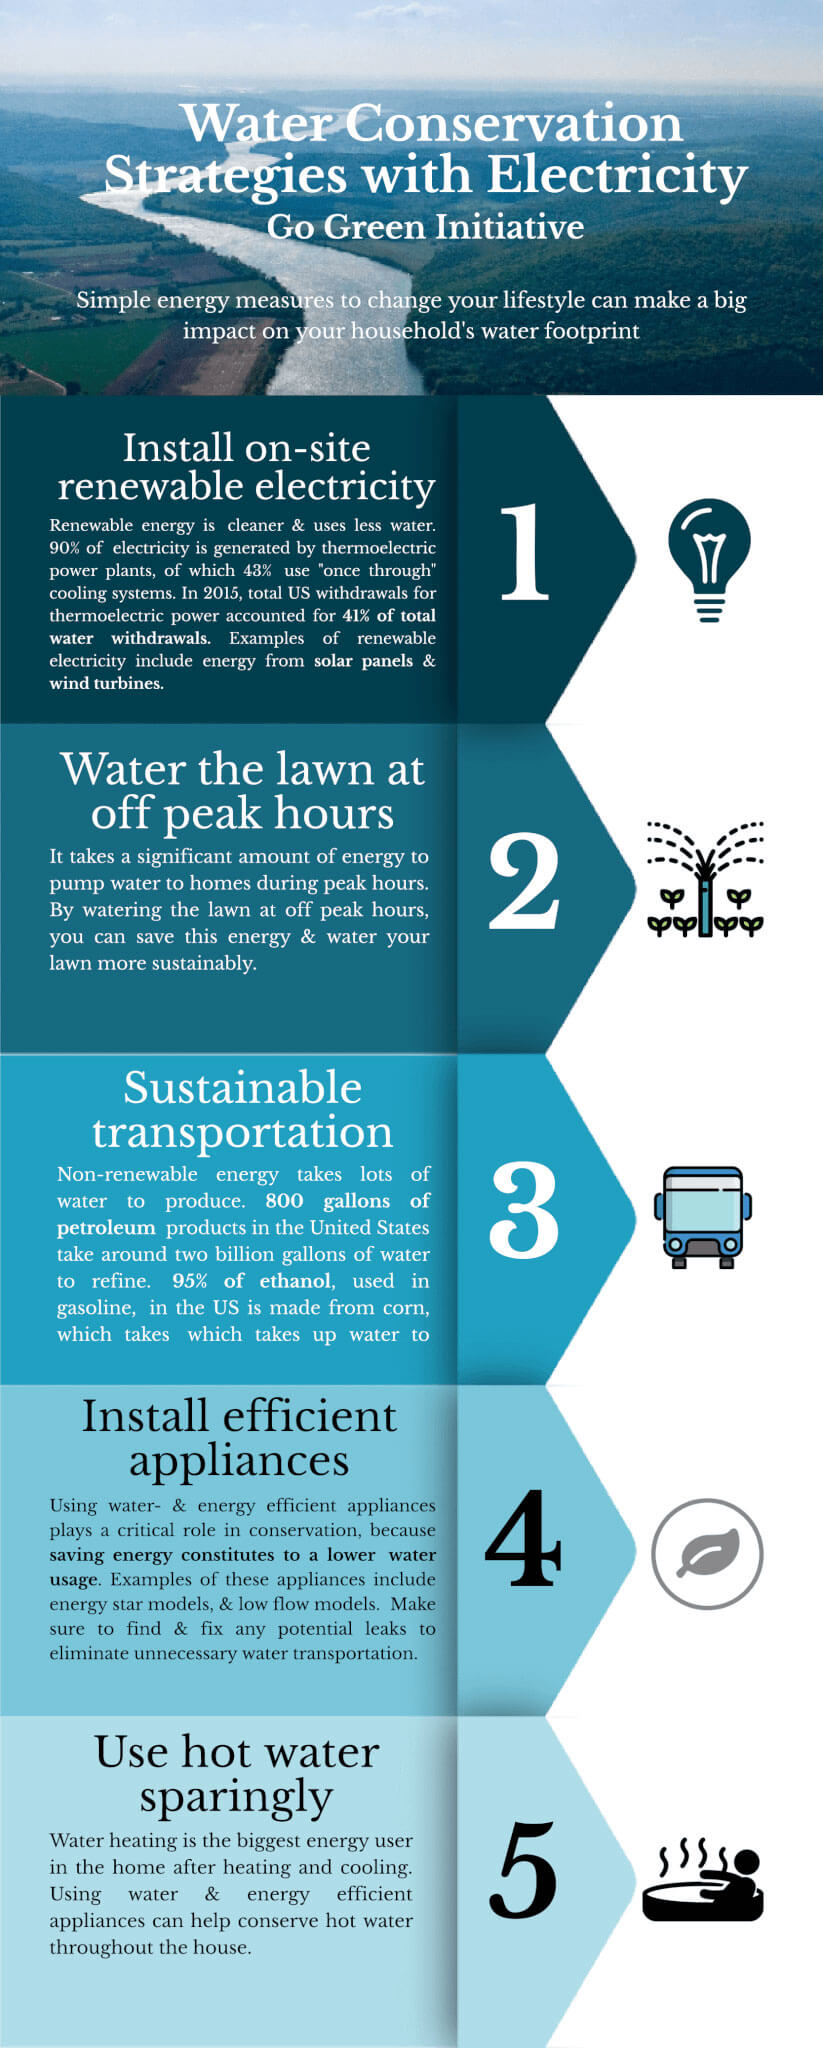 water conservation strategies inforgraphic: 1. install renewable electricity, 2. water lawn at off peak hours, 3. sustainable transportation